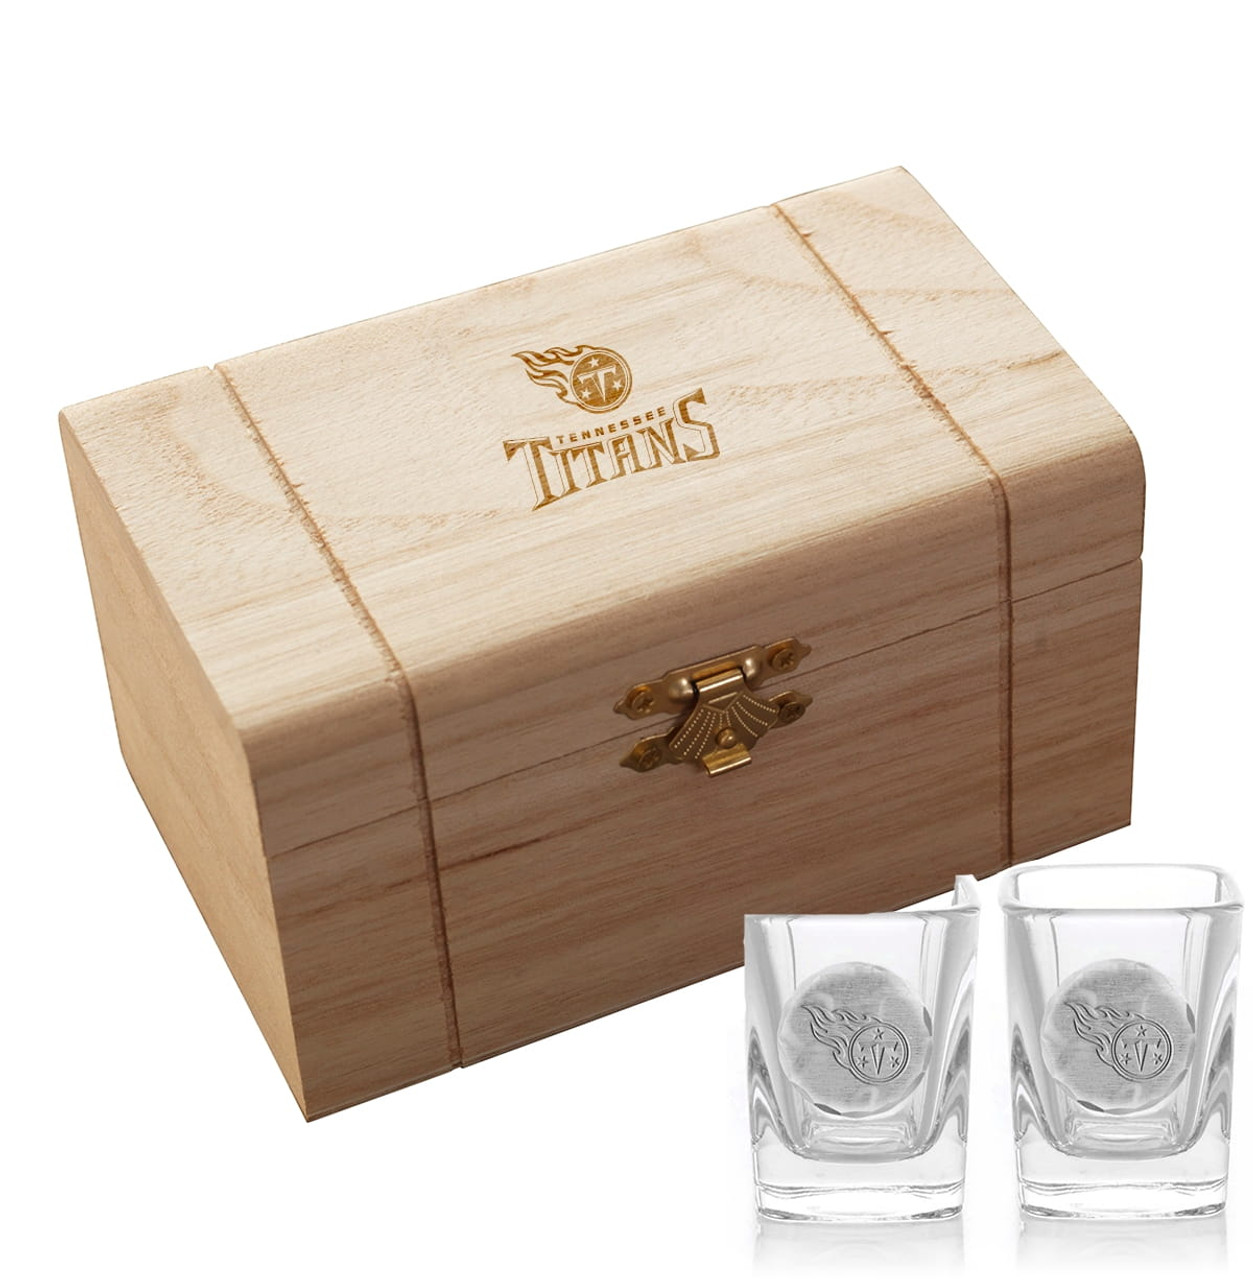 Tennessee Titans 2-Piece Shot Glass Set and Box (Aluminum)